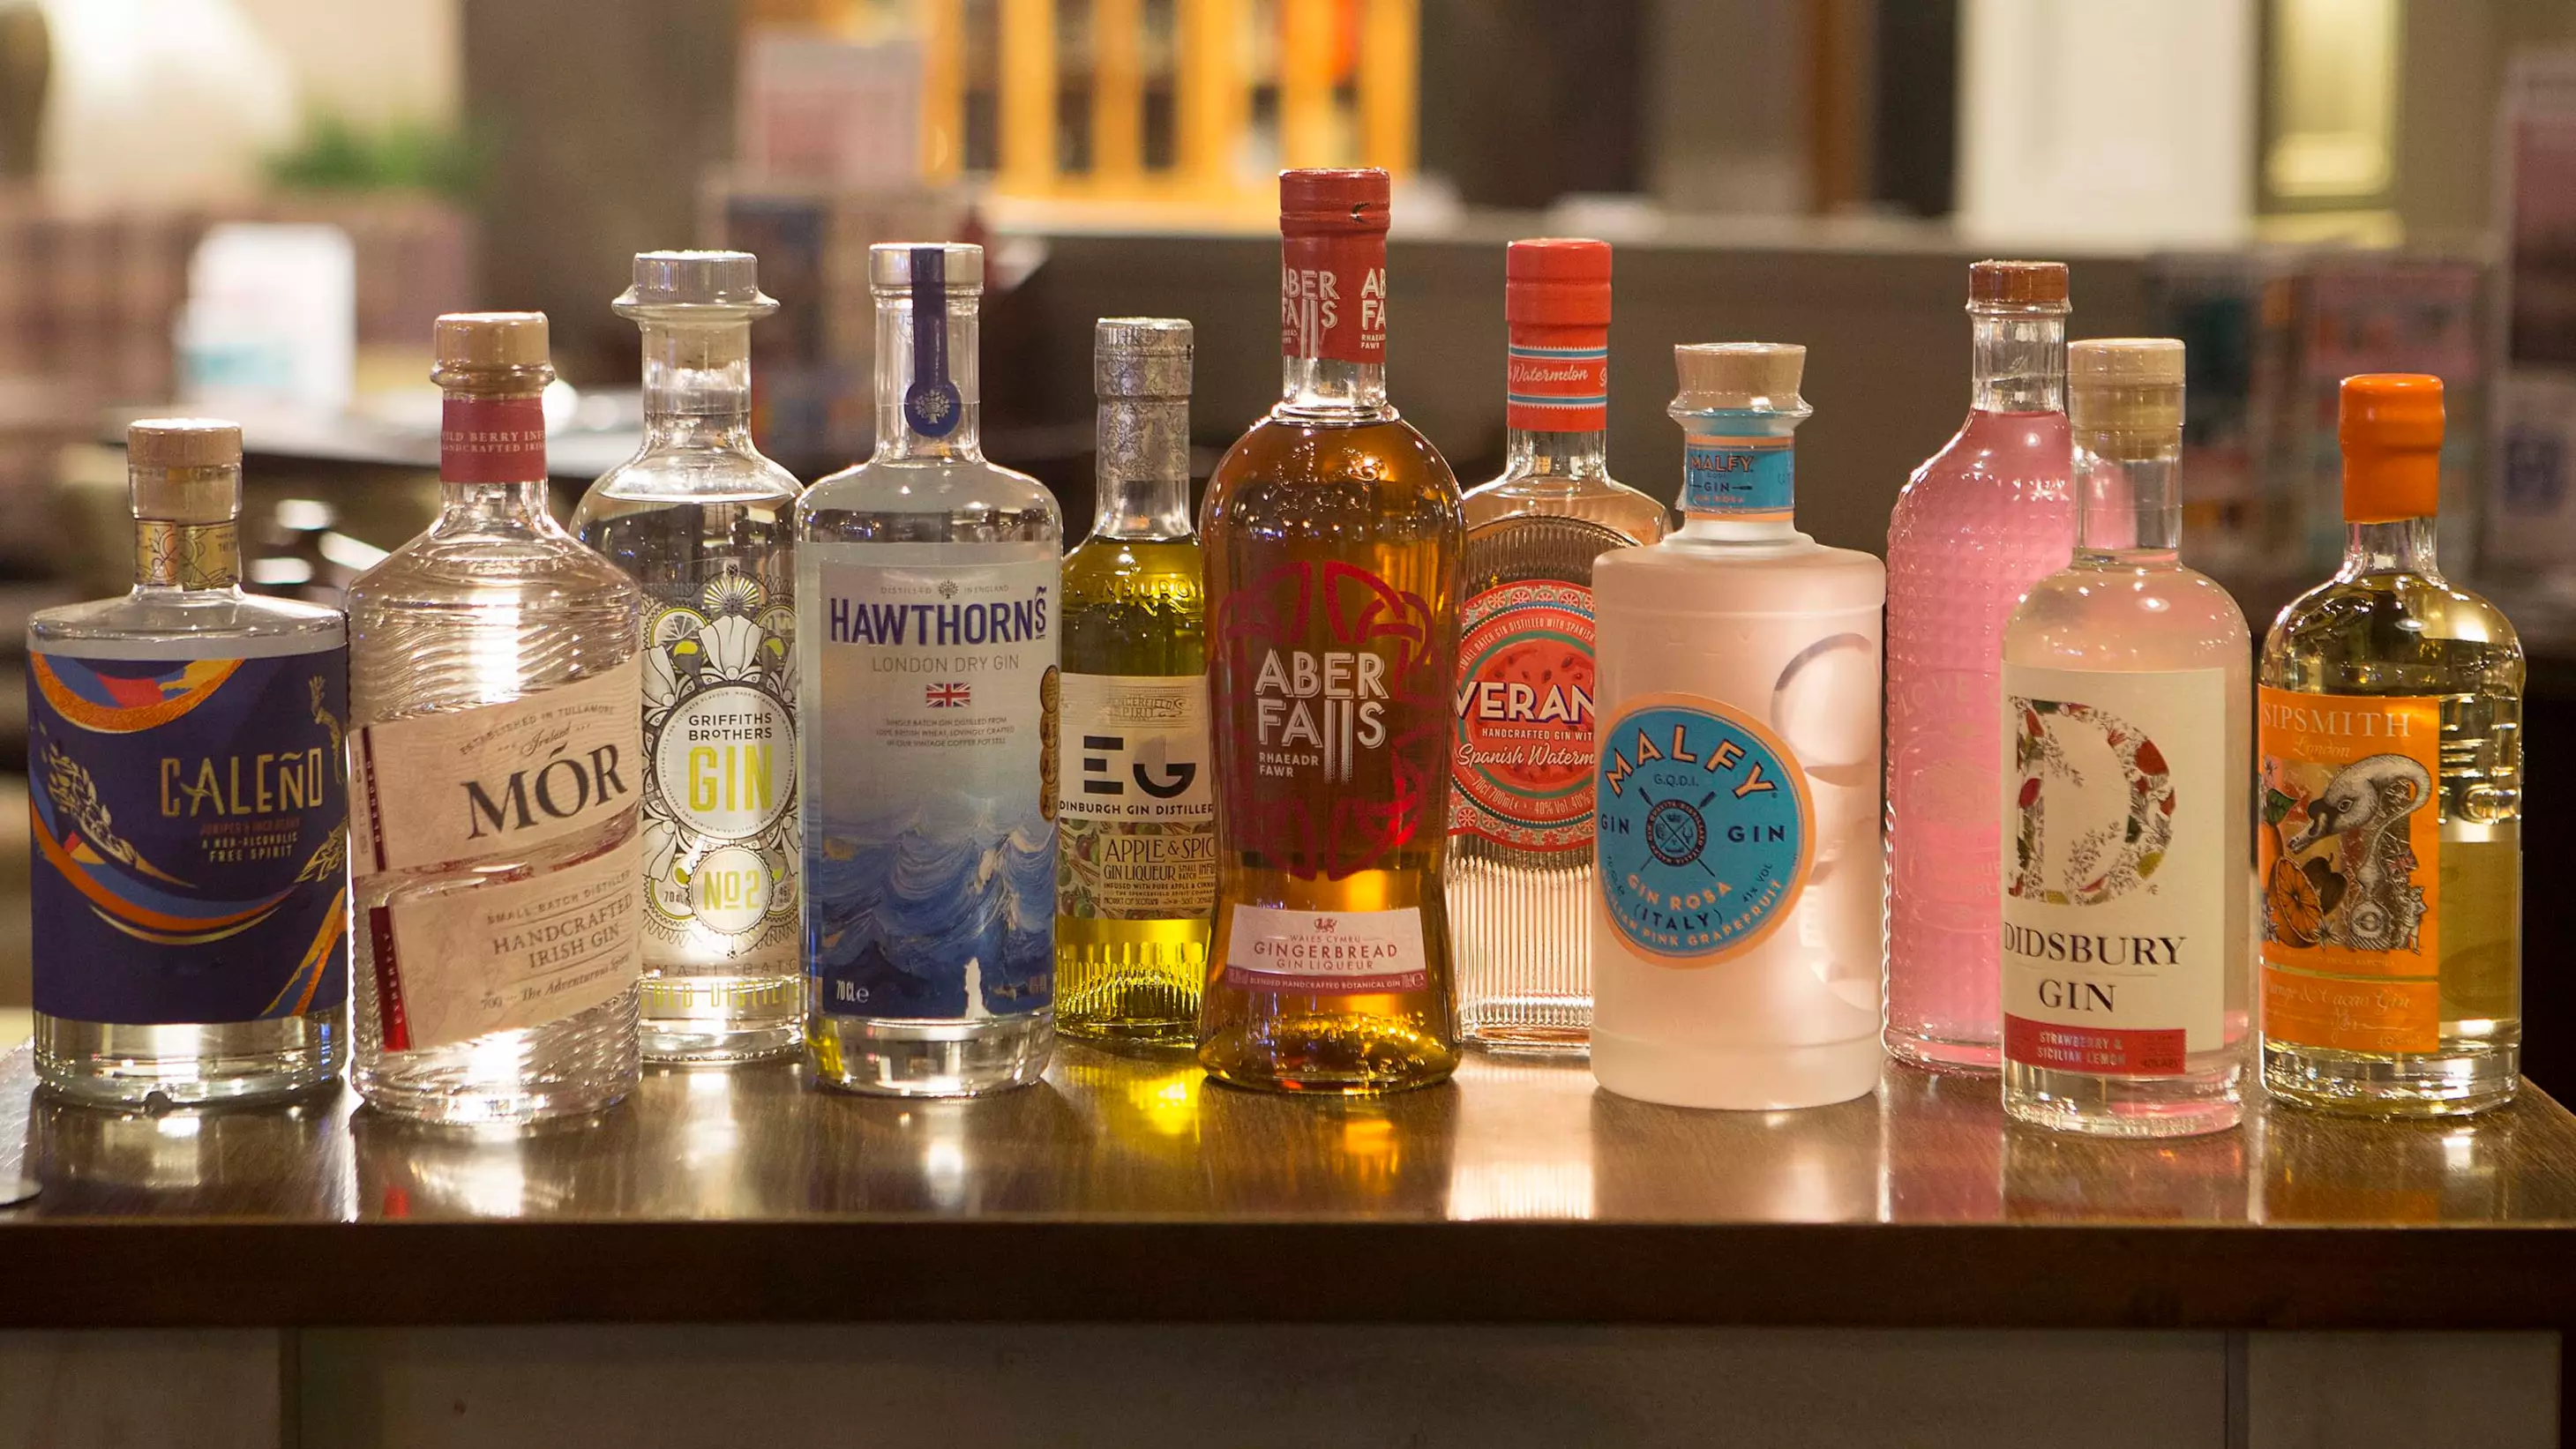 Wetherspoon Pubs Are Holding A 17 Day Gin Festival 